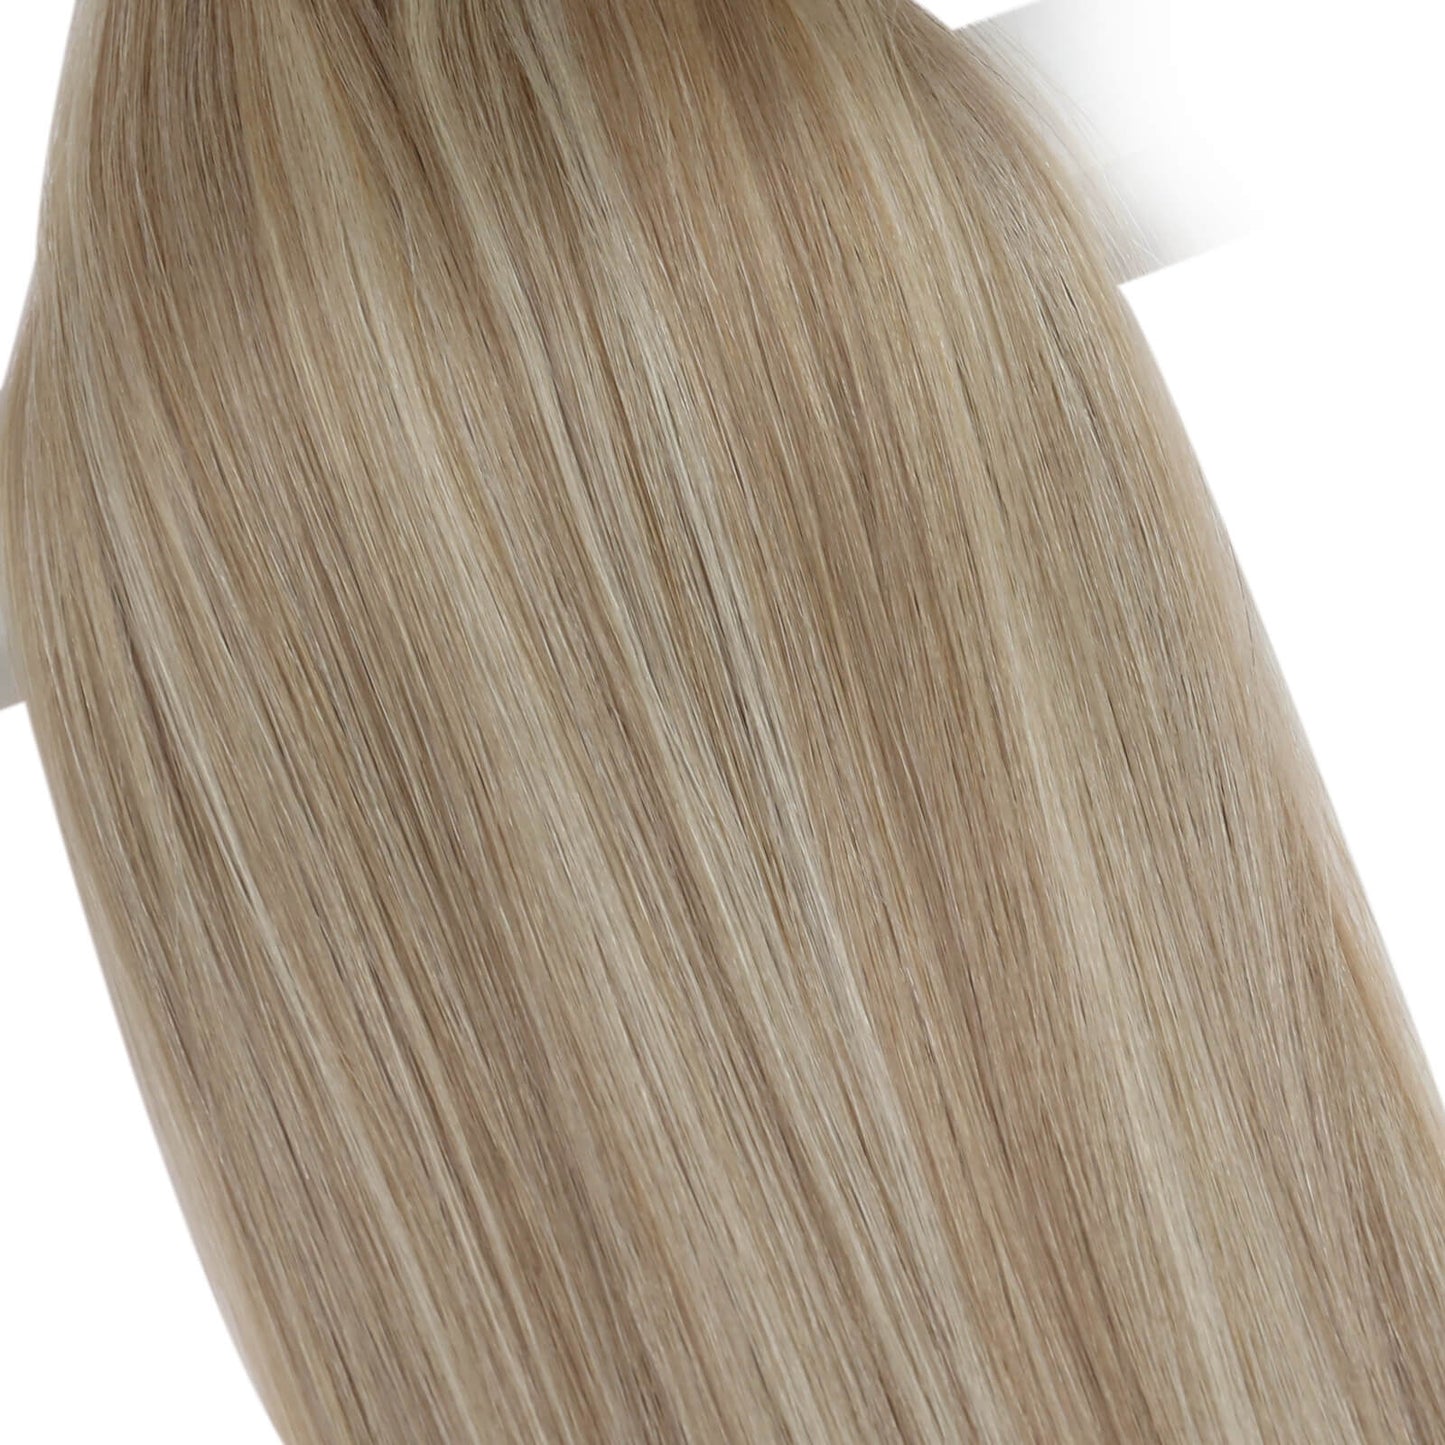 sew in hair extensions highlight blonde human hair wholesale hair wefts